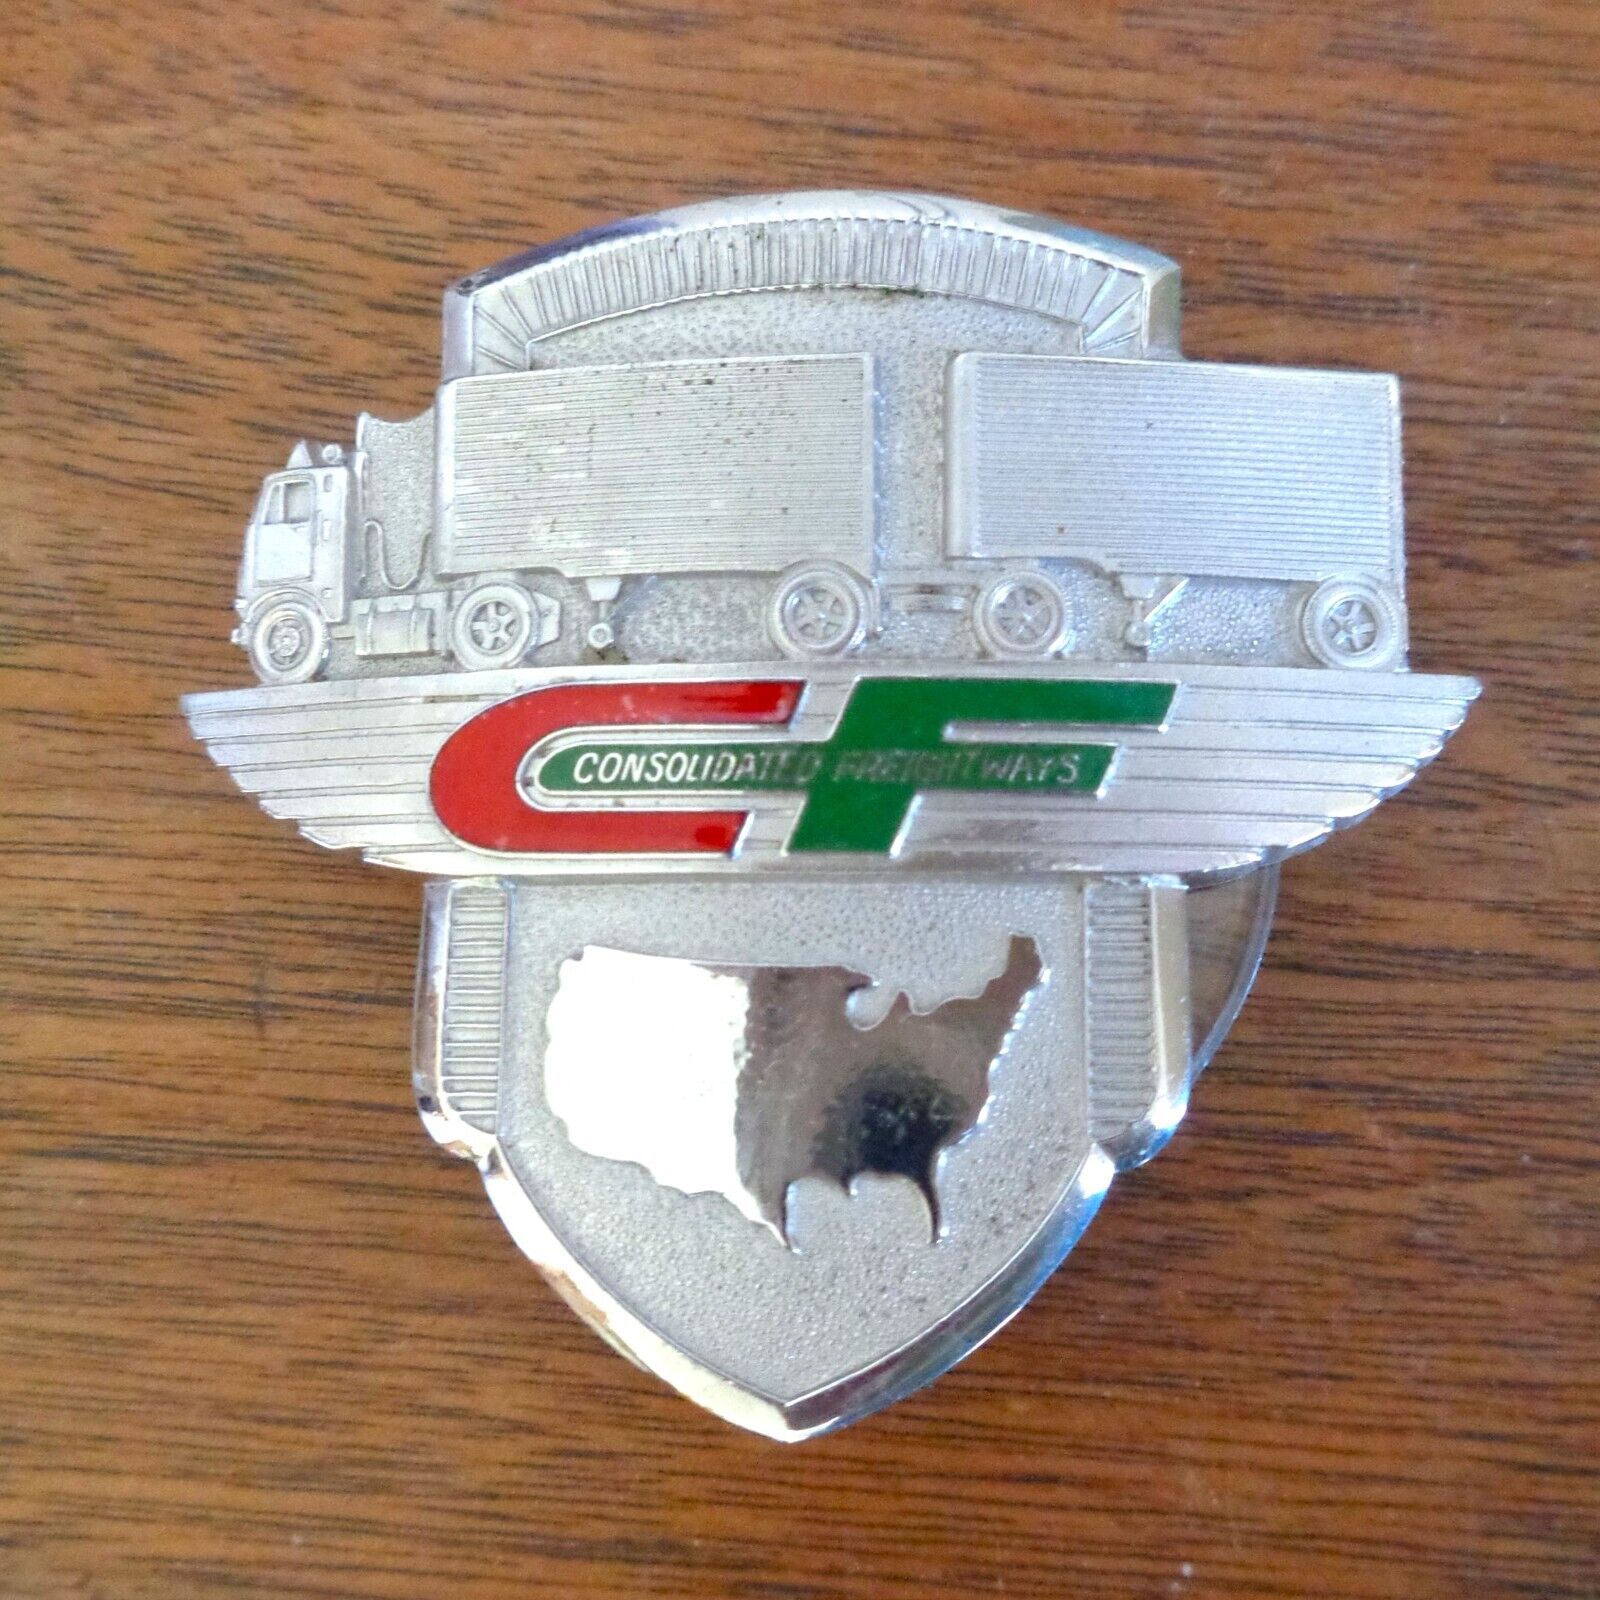 CONSOLIDATED FREIGHTWAYS Hat Badge